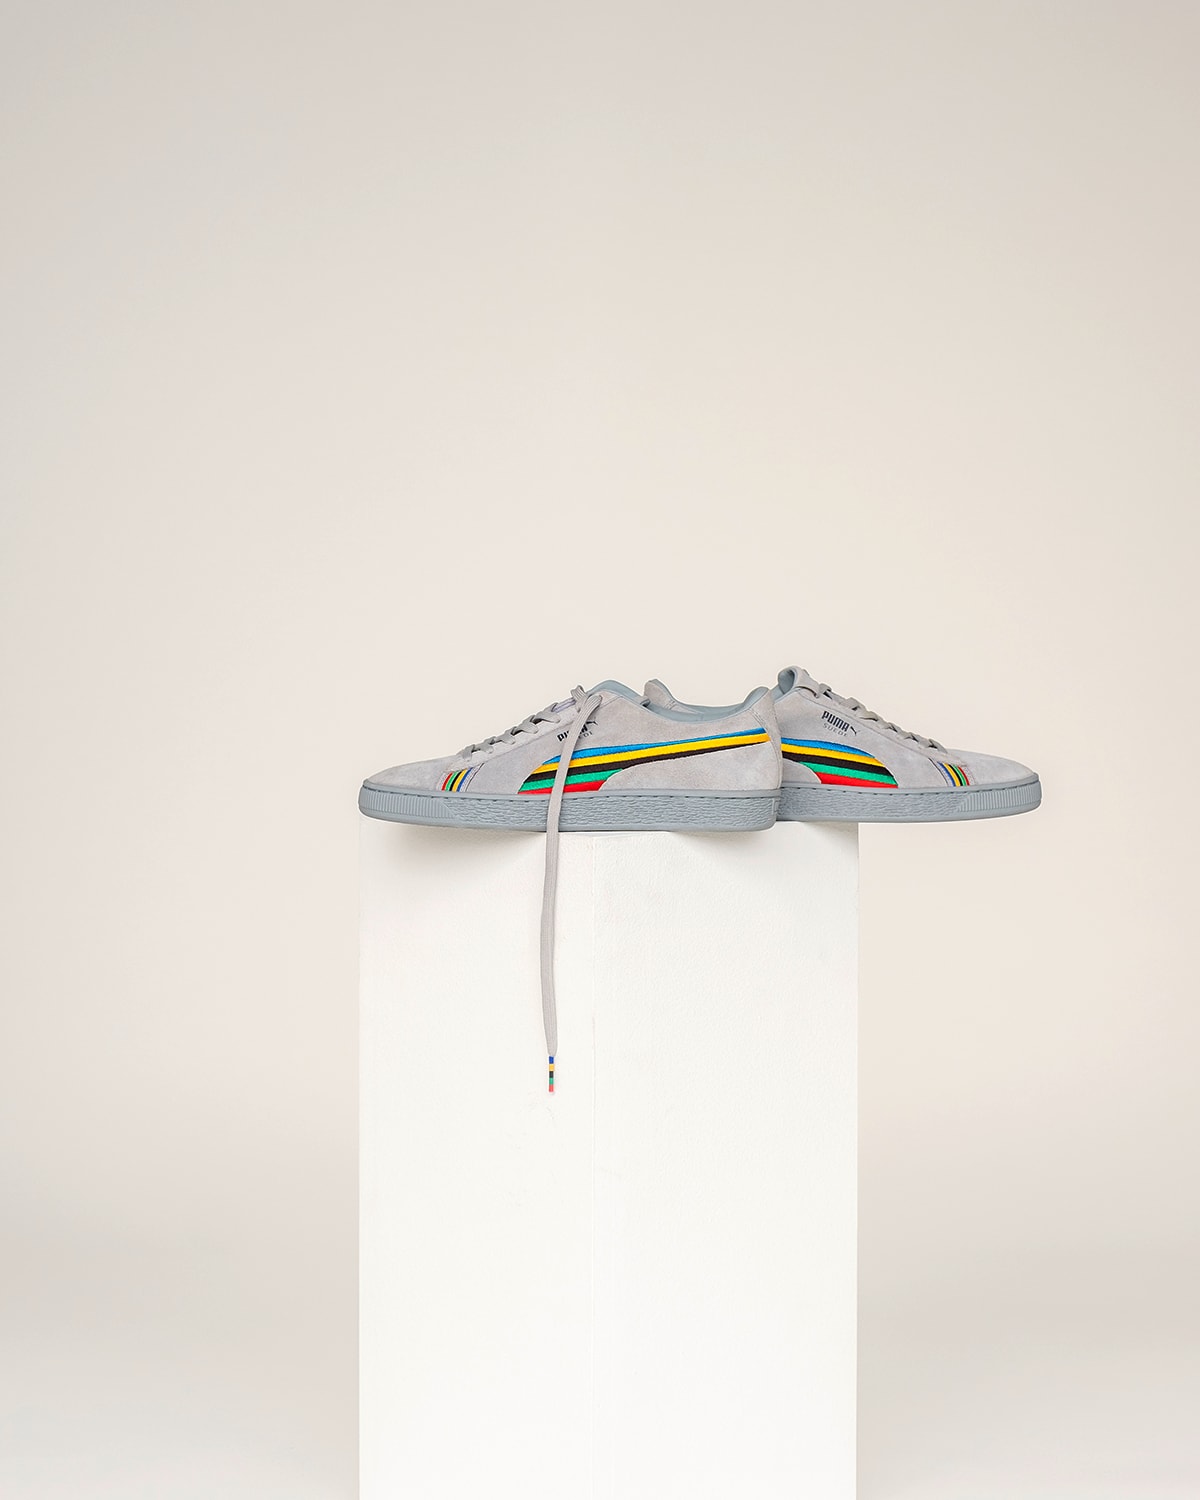 PUMA POWER THRU PEACE Collection Tommie Smith